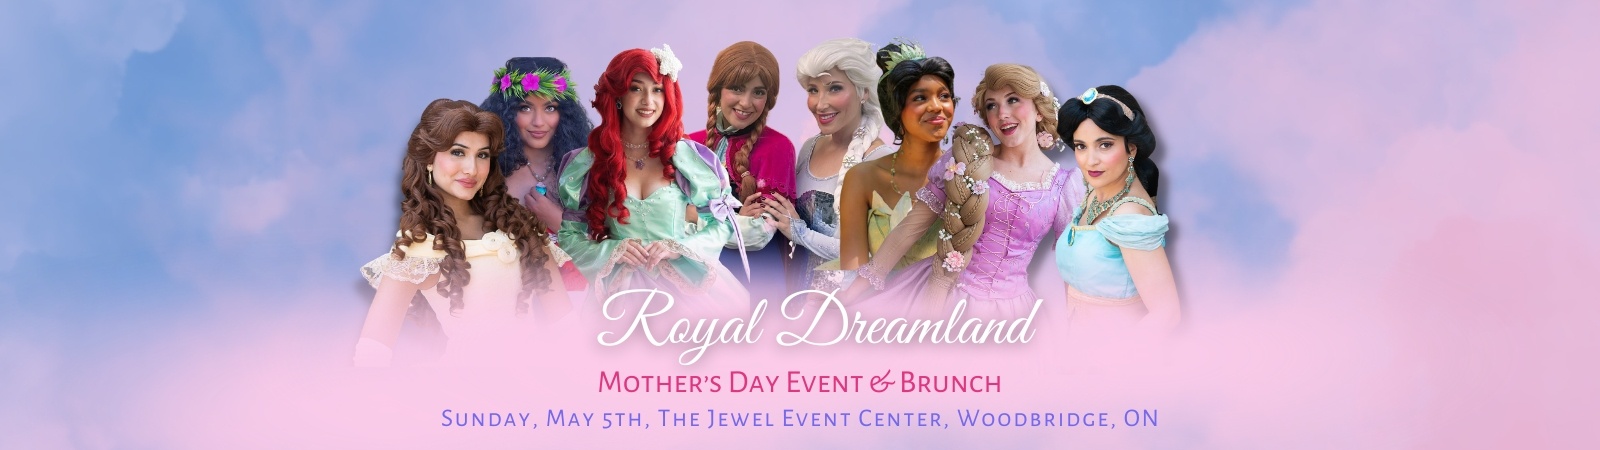 Royal Dreamland Mother's Day Event